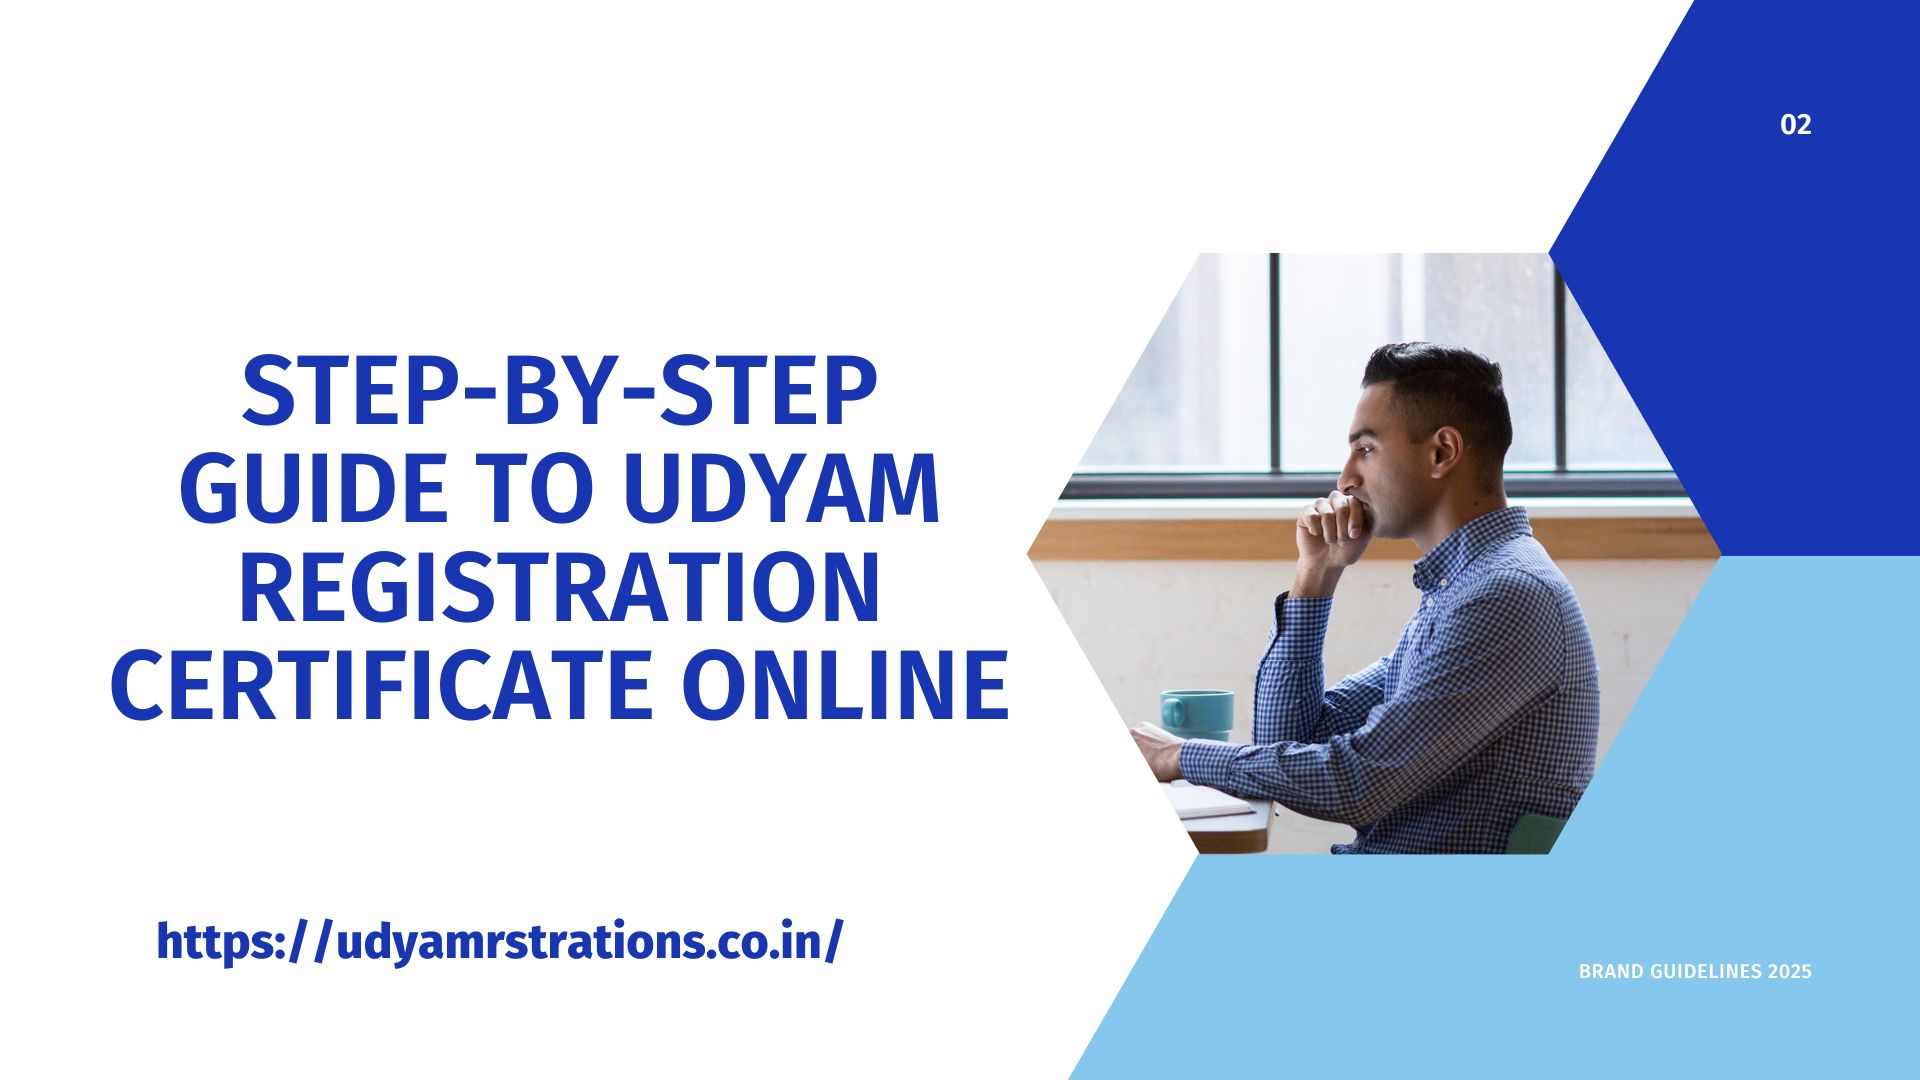 Step-by-Step Guide to Udyam Registration Certificate Online